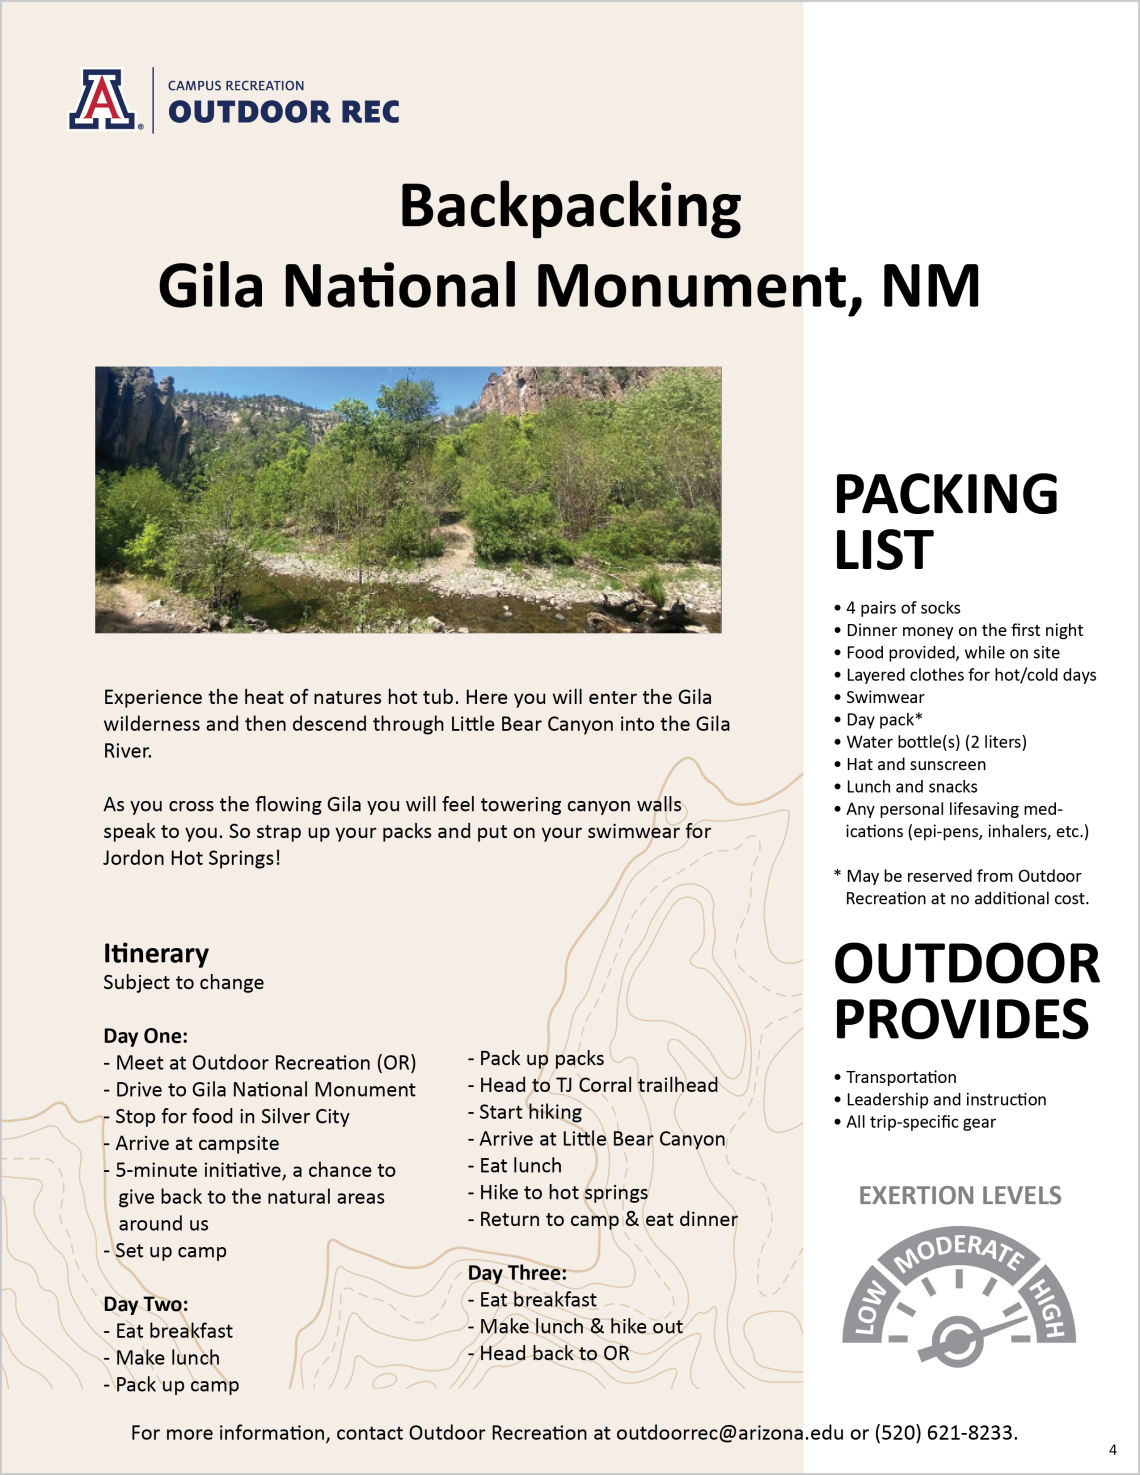 Backpacking - Gila National Monument, NM